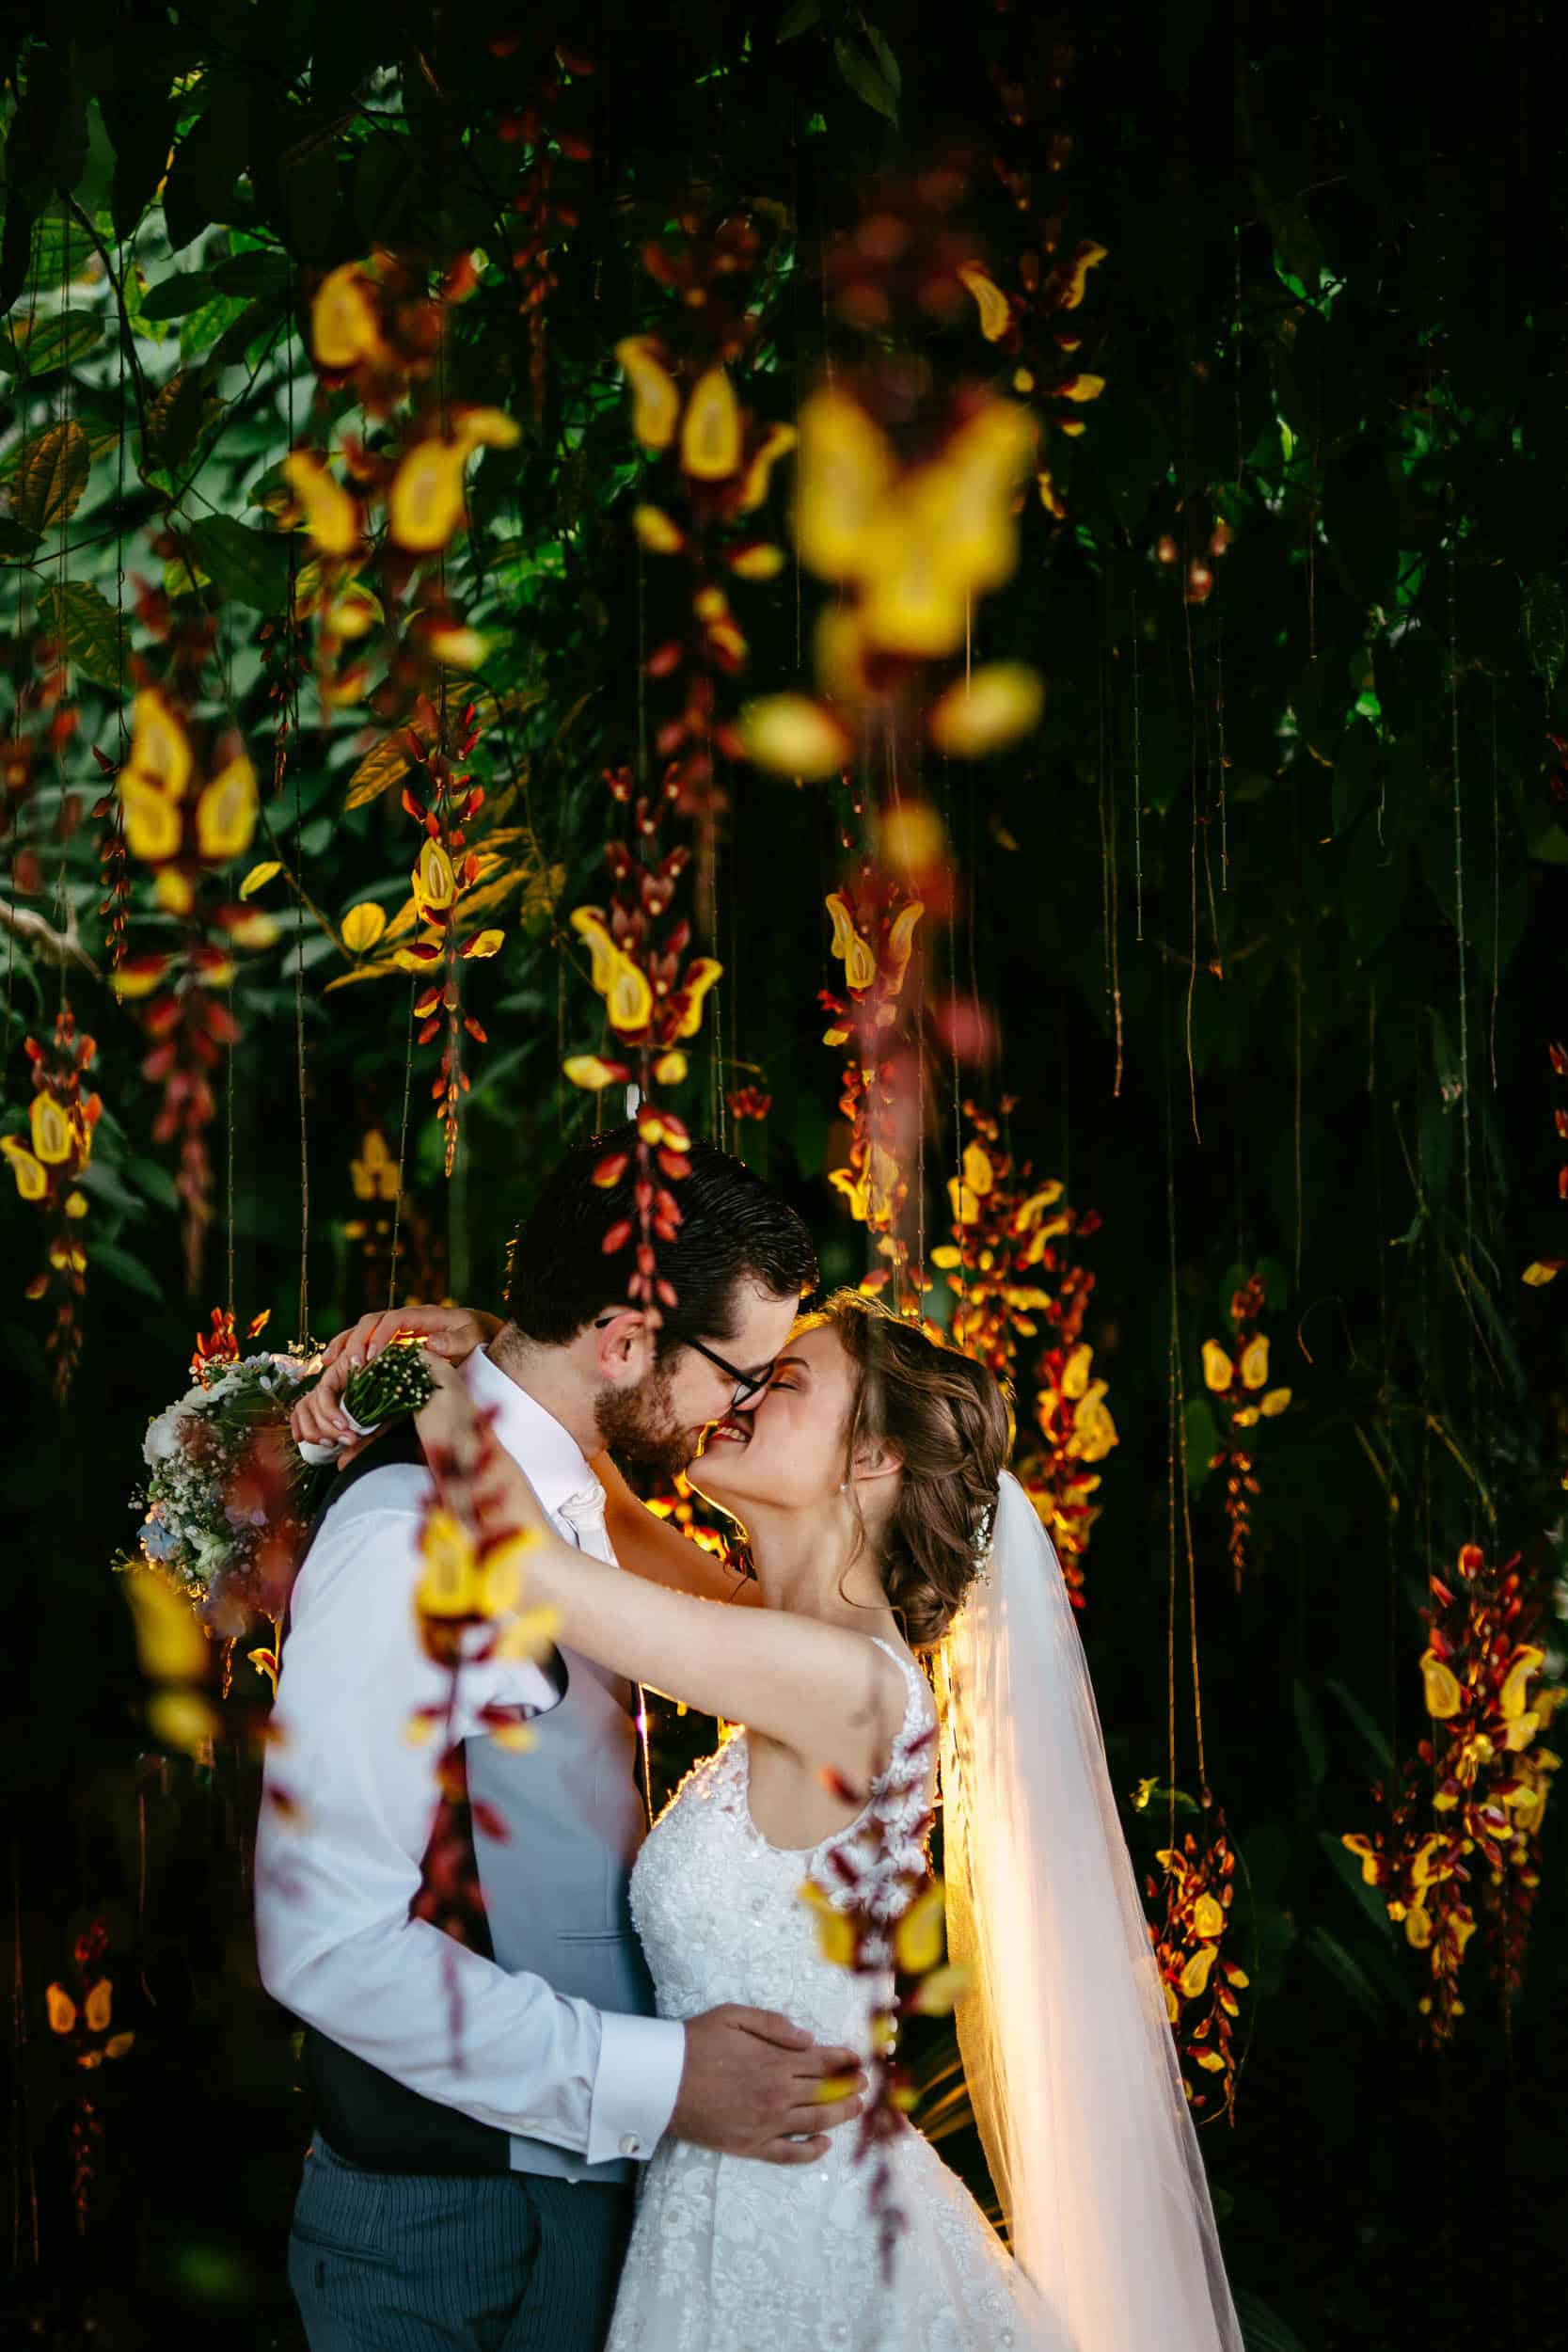 A bride and groom kiss under a canopy at the Wedding in the delft botanical garden.